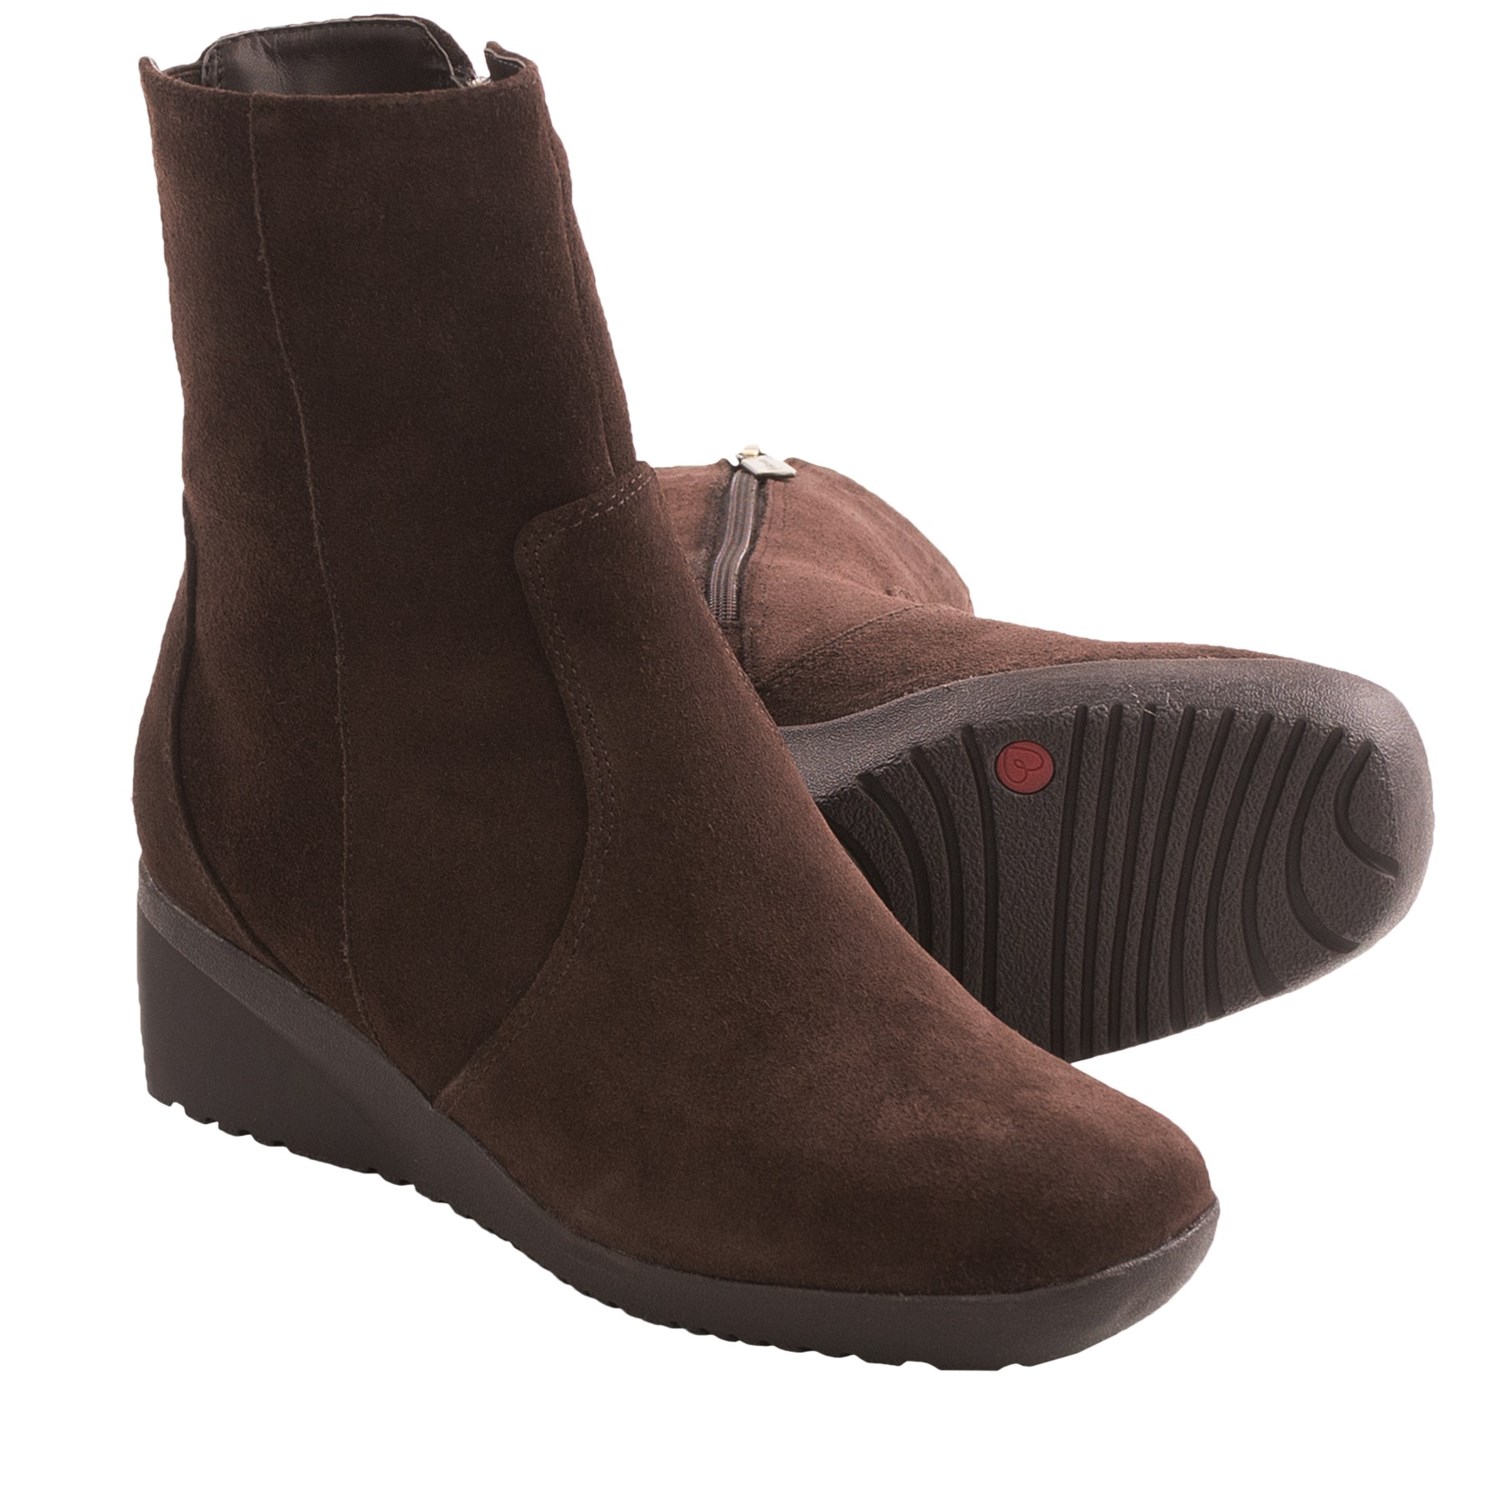 Blondo Corah Wedge Boots (For Women) - Save 66%